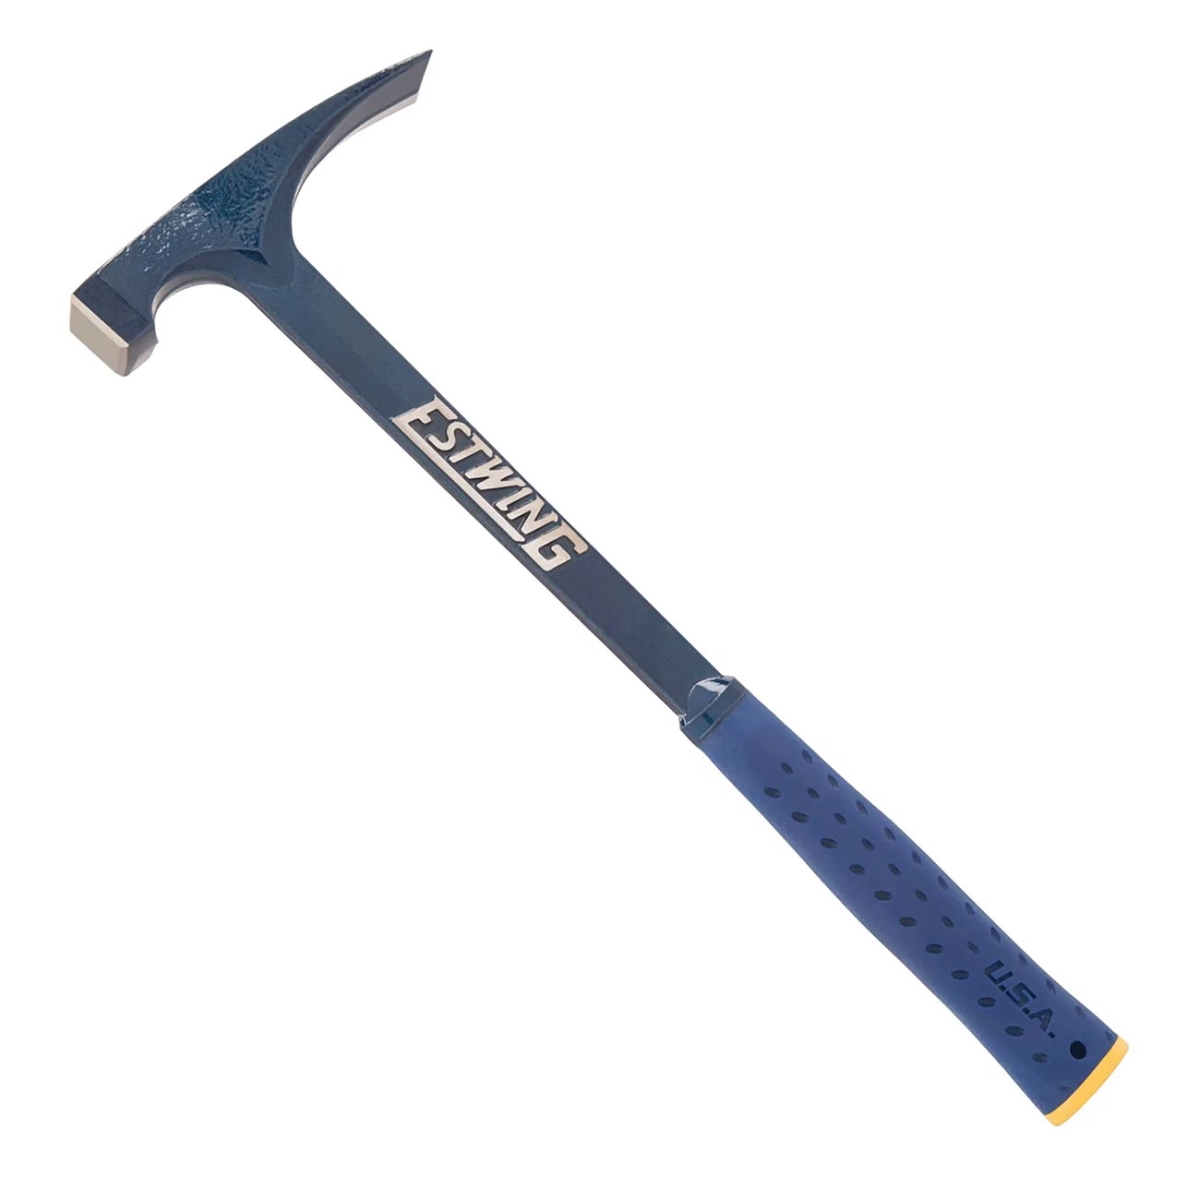 Picture of Estwing E622BLCL 22 oz Smooth Face Bricklayer Hammer - Blue Shock Reduction Grip